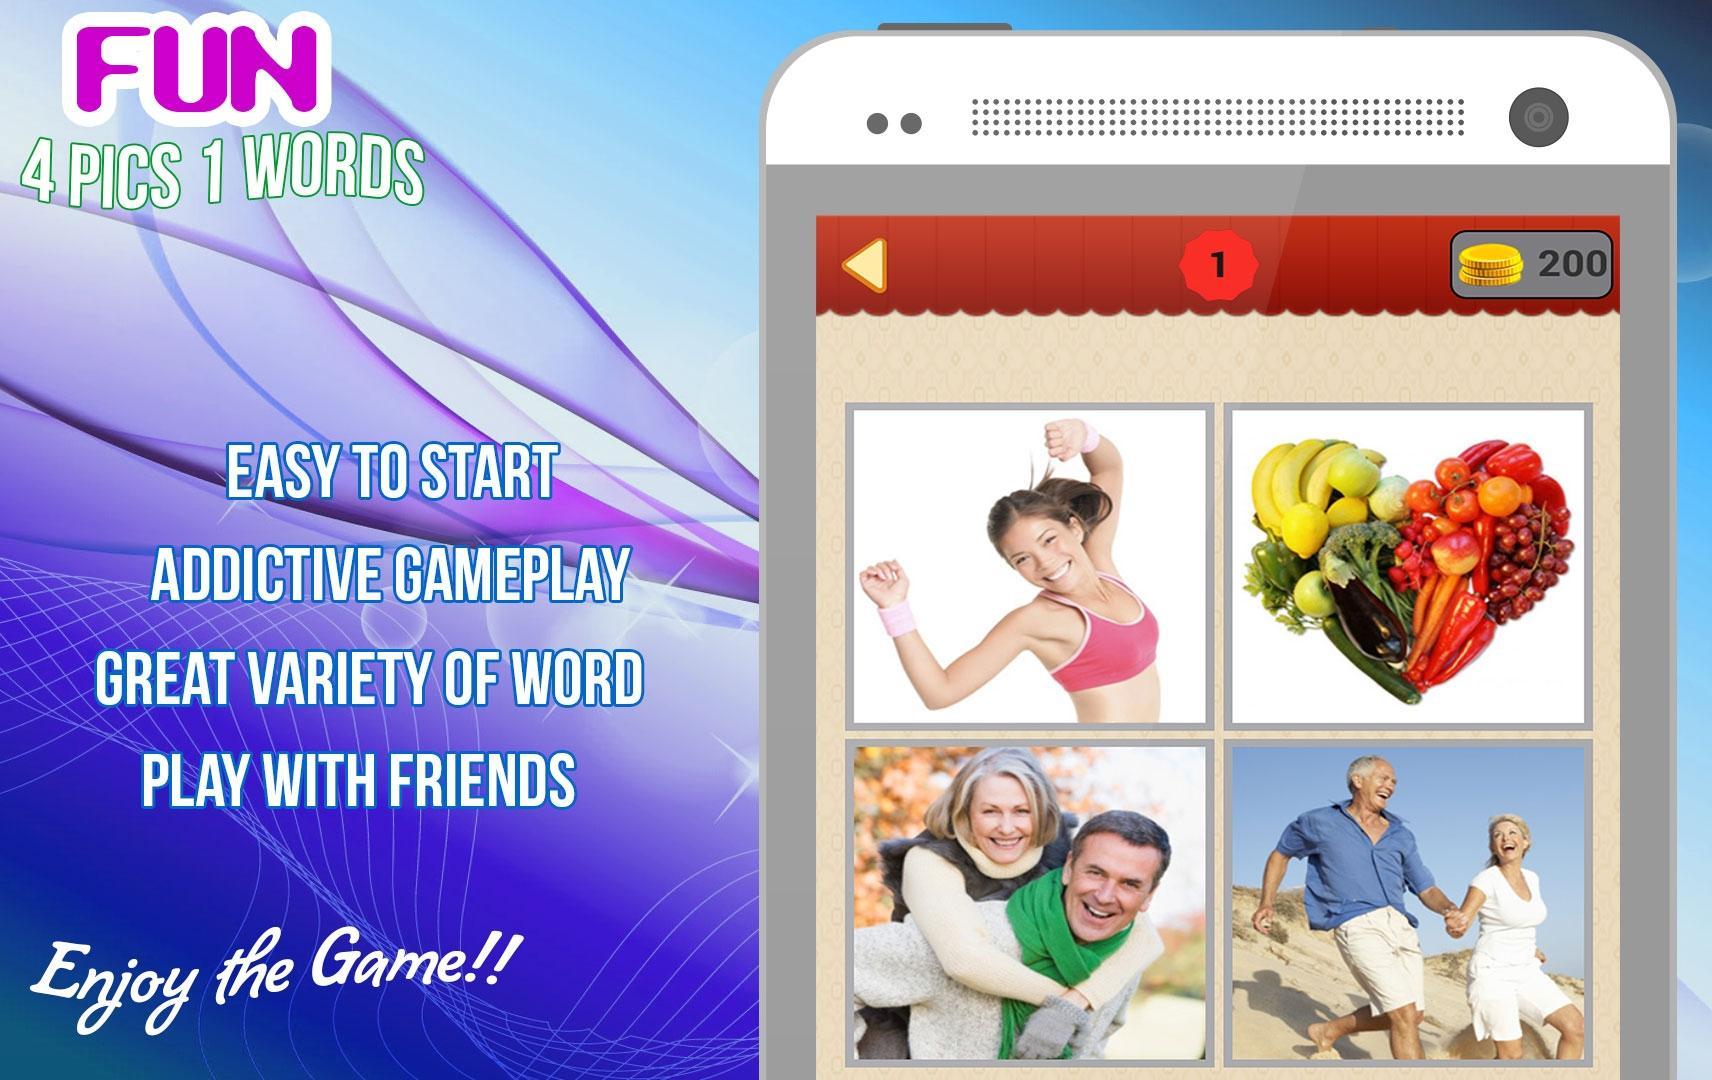 4 Pics 1 Word. 4 Pics 1 Word Gameplay. 4pics 1 Word about Health pdf. 4pics 1 Word about Health. Центр первое слово